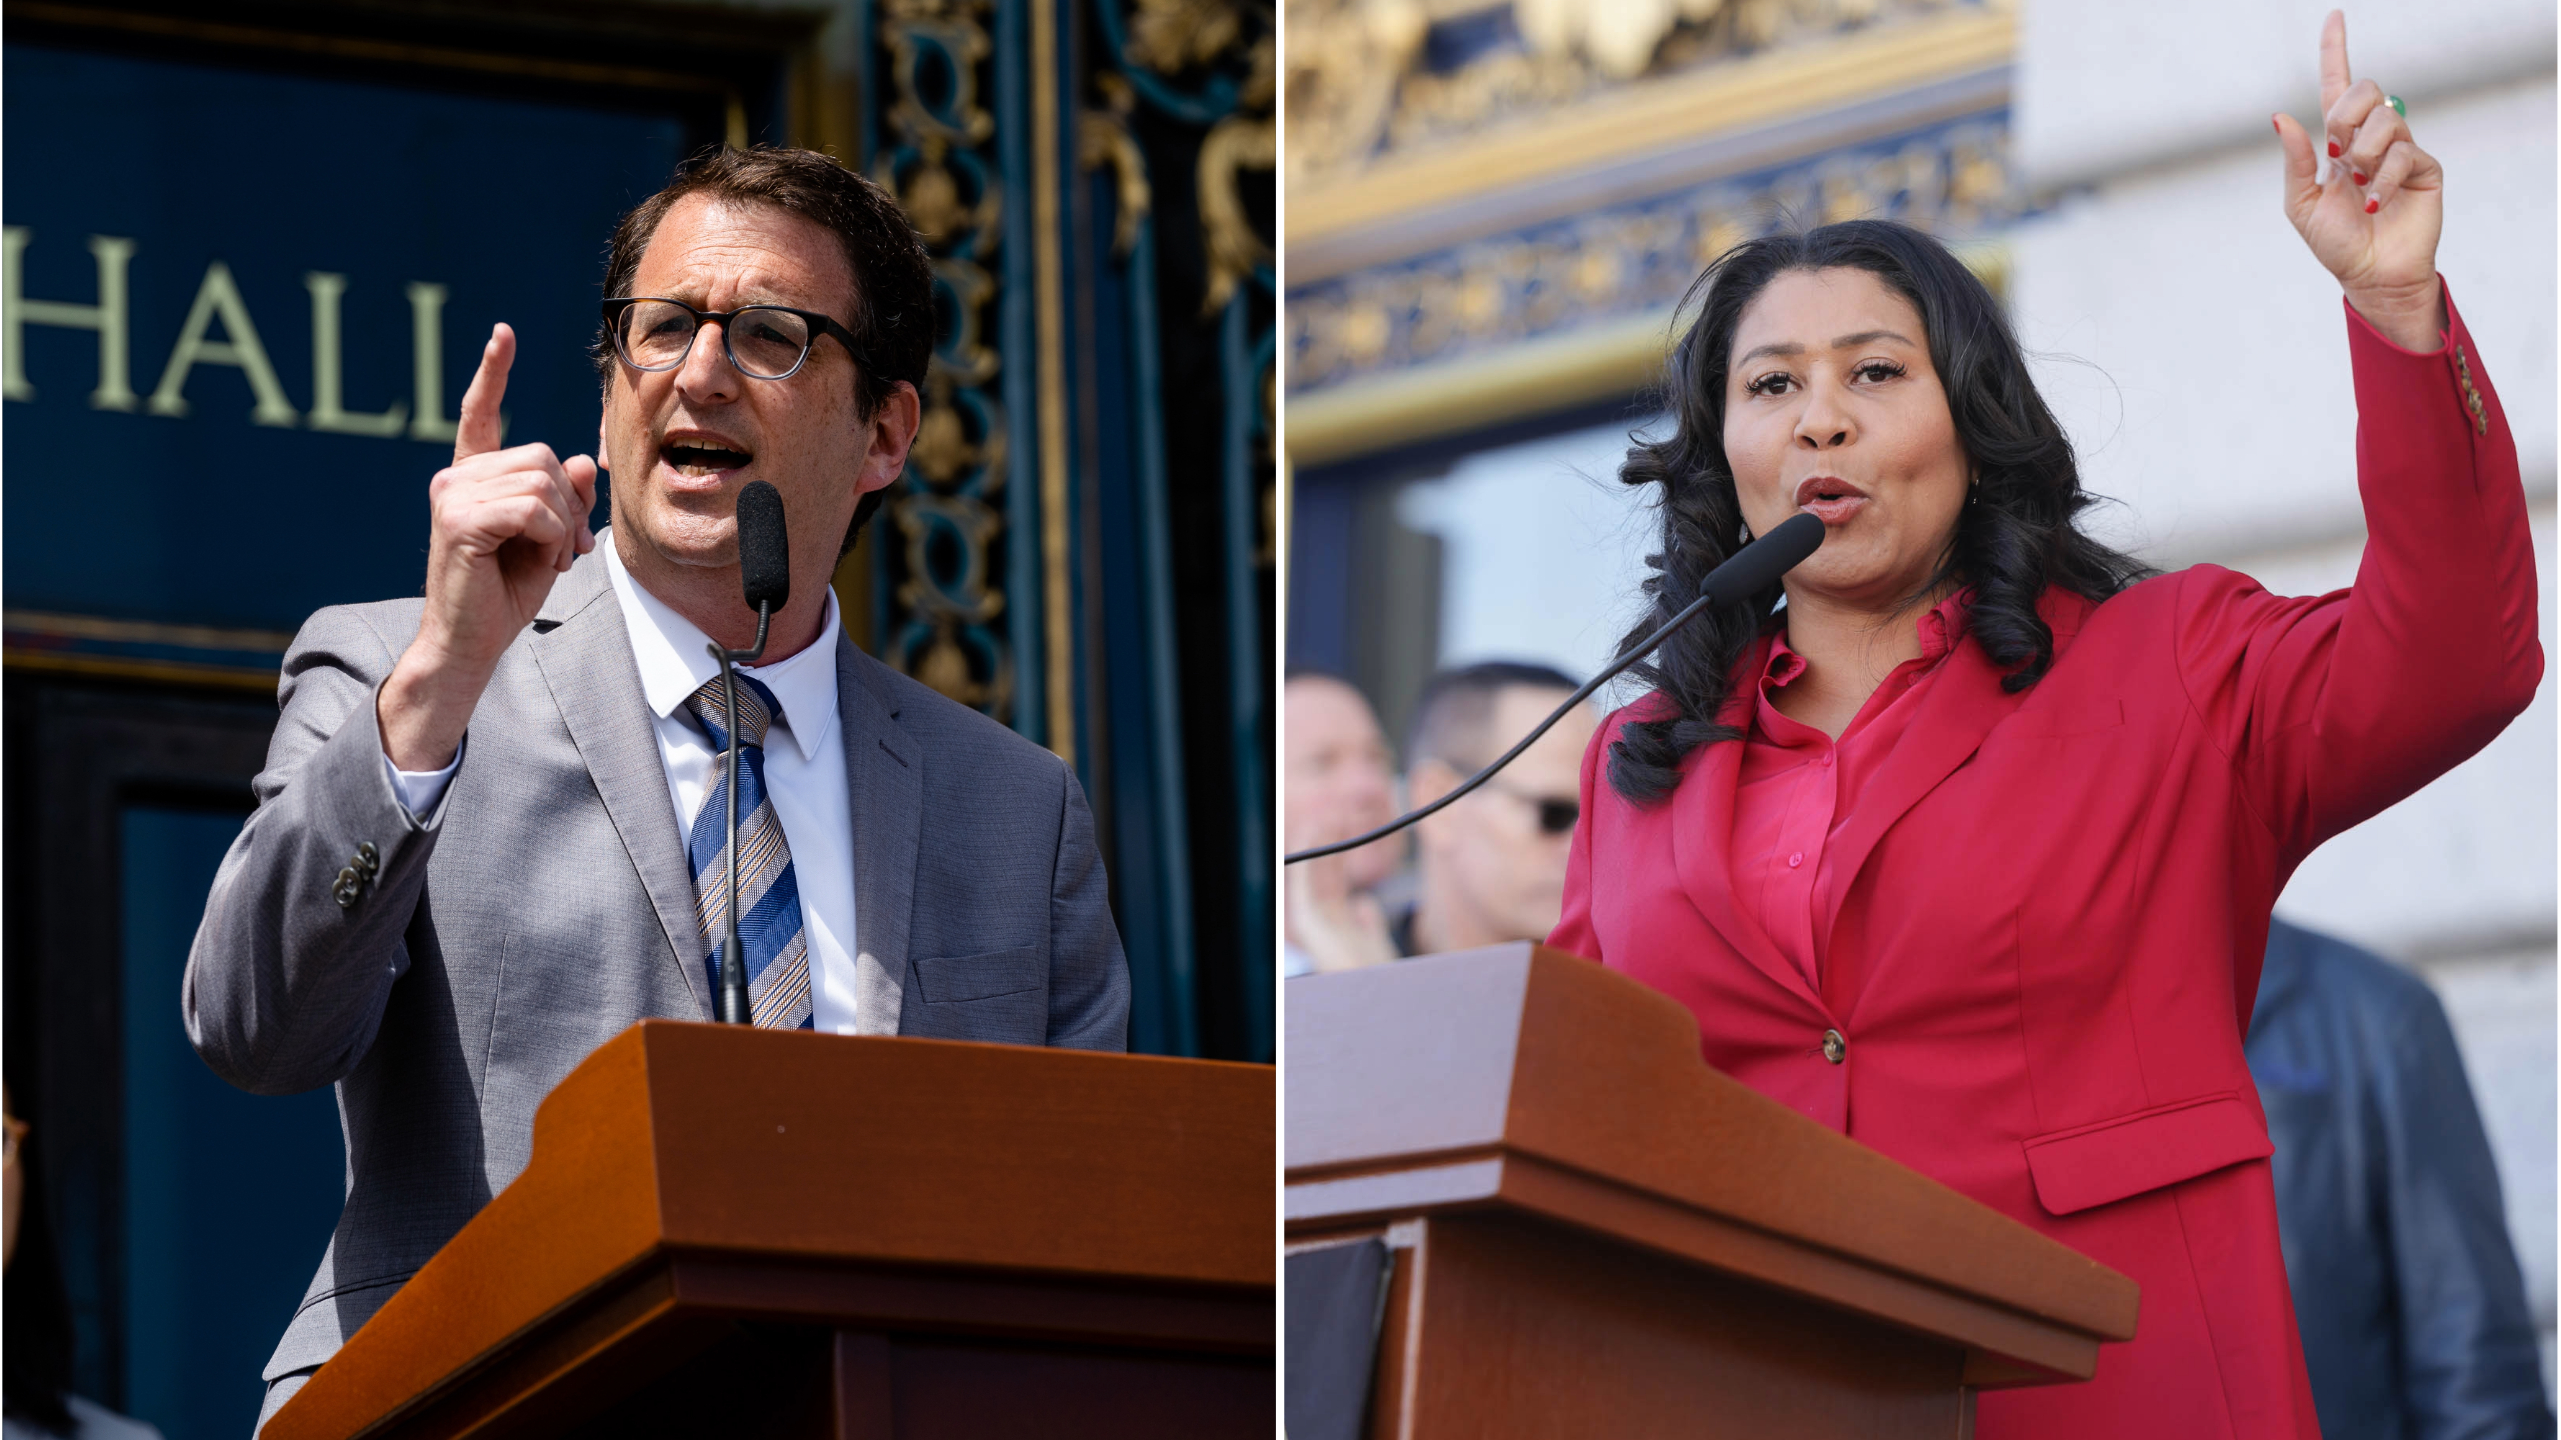 a composite image shows Dean Preston speaking in a gray suit at an outdoor podium with a hand raised, and Mayor London Breed speaking in a red suit, also with her arm raised